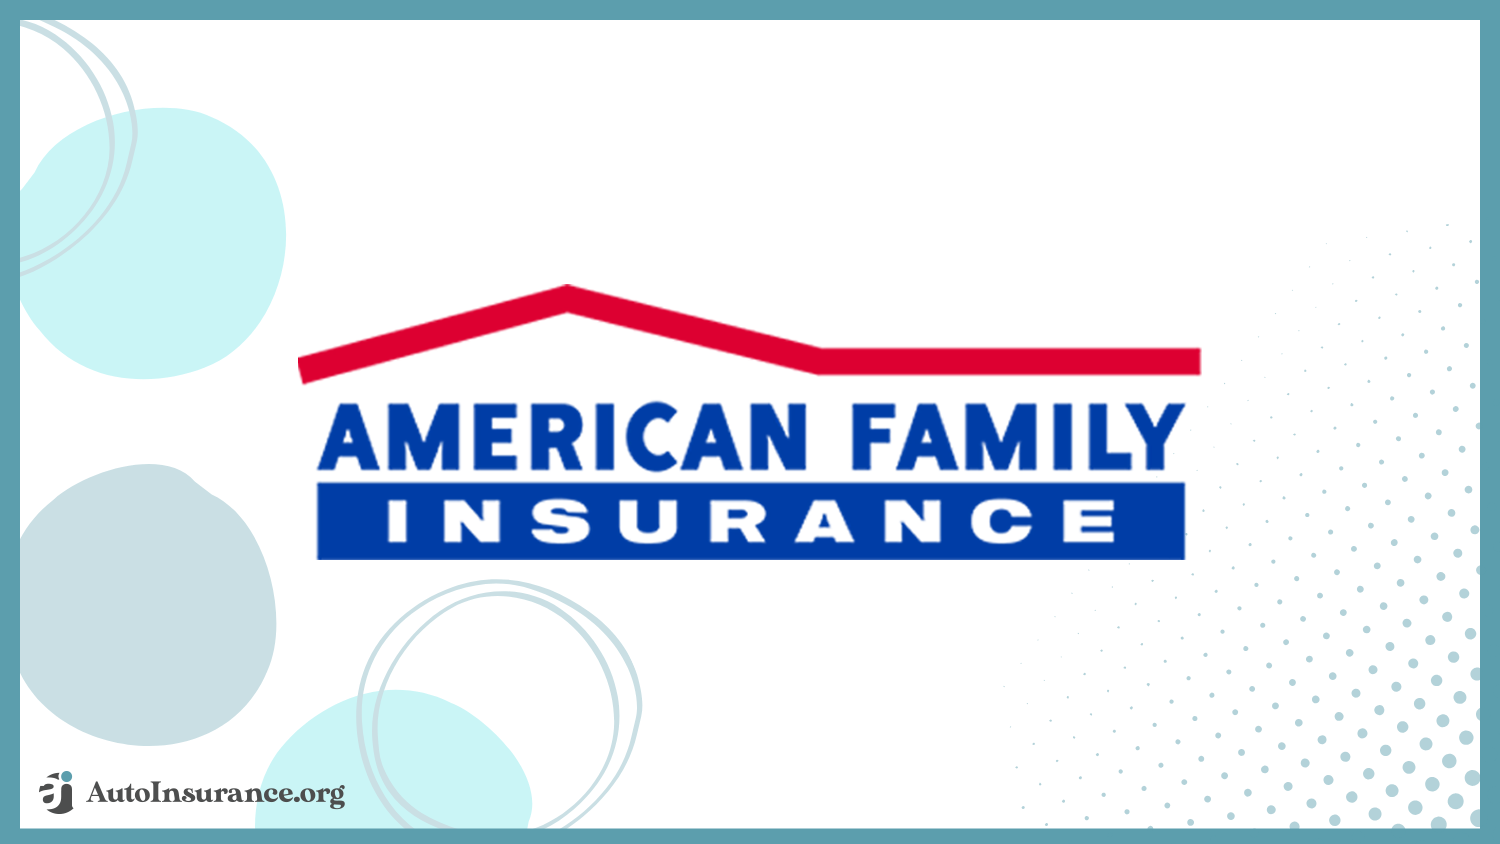 Best Ford Taurus X Auto Insurance: American Family